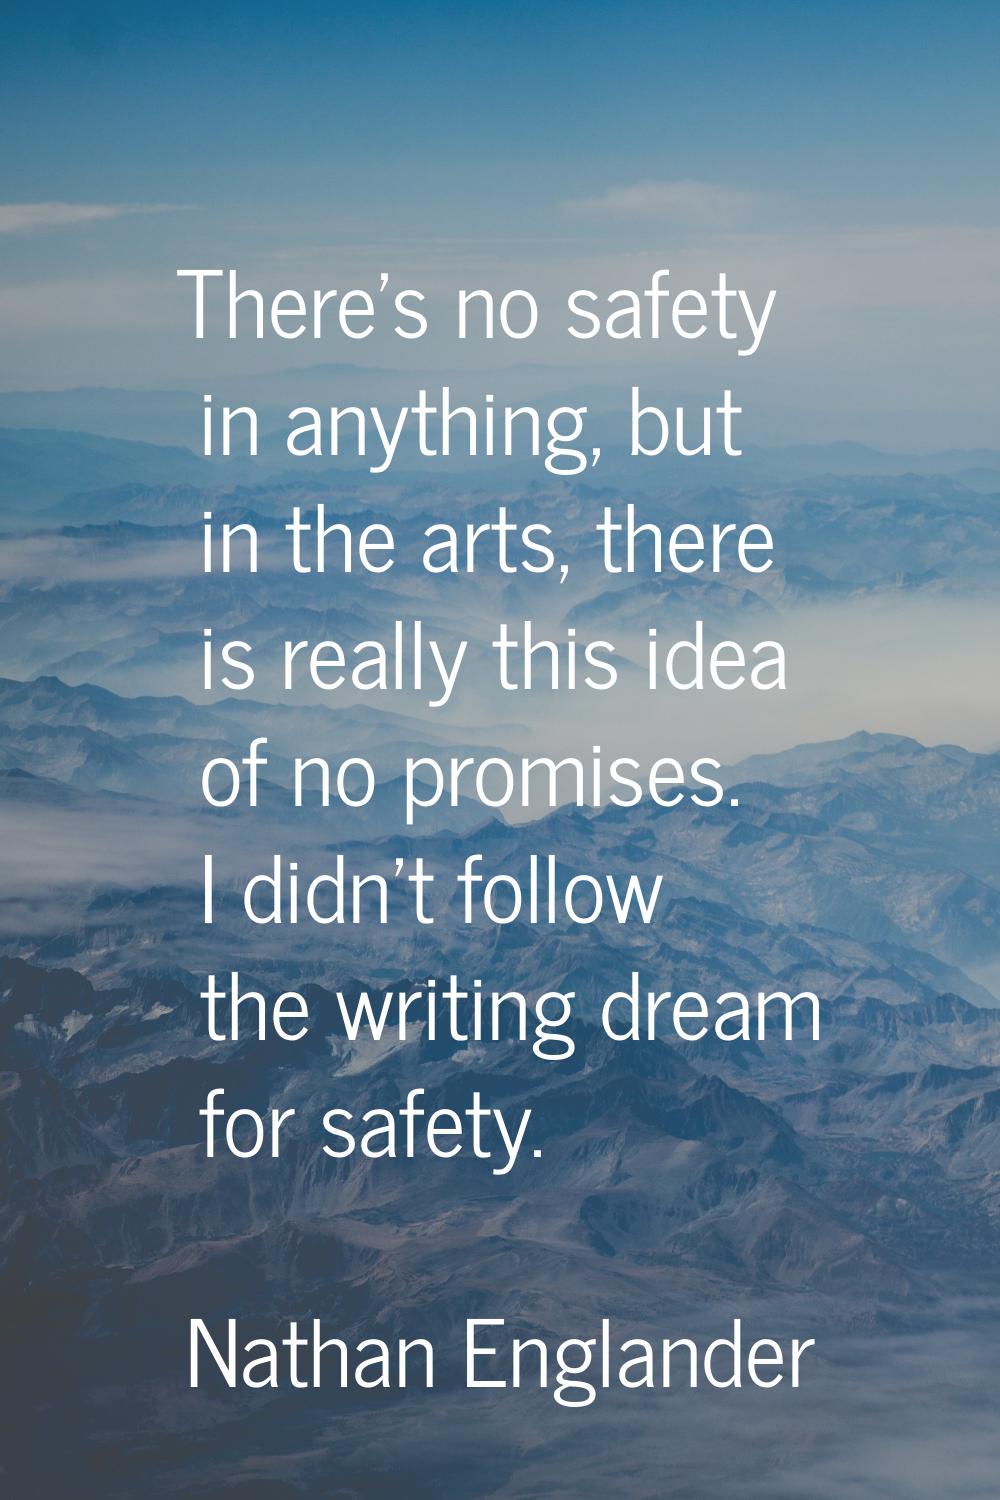 There's no safety in anything, but in the arts, there is really this idea of no promises. I didn't 